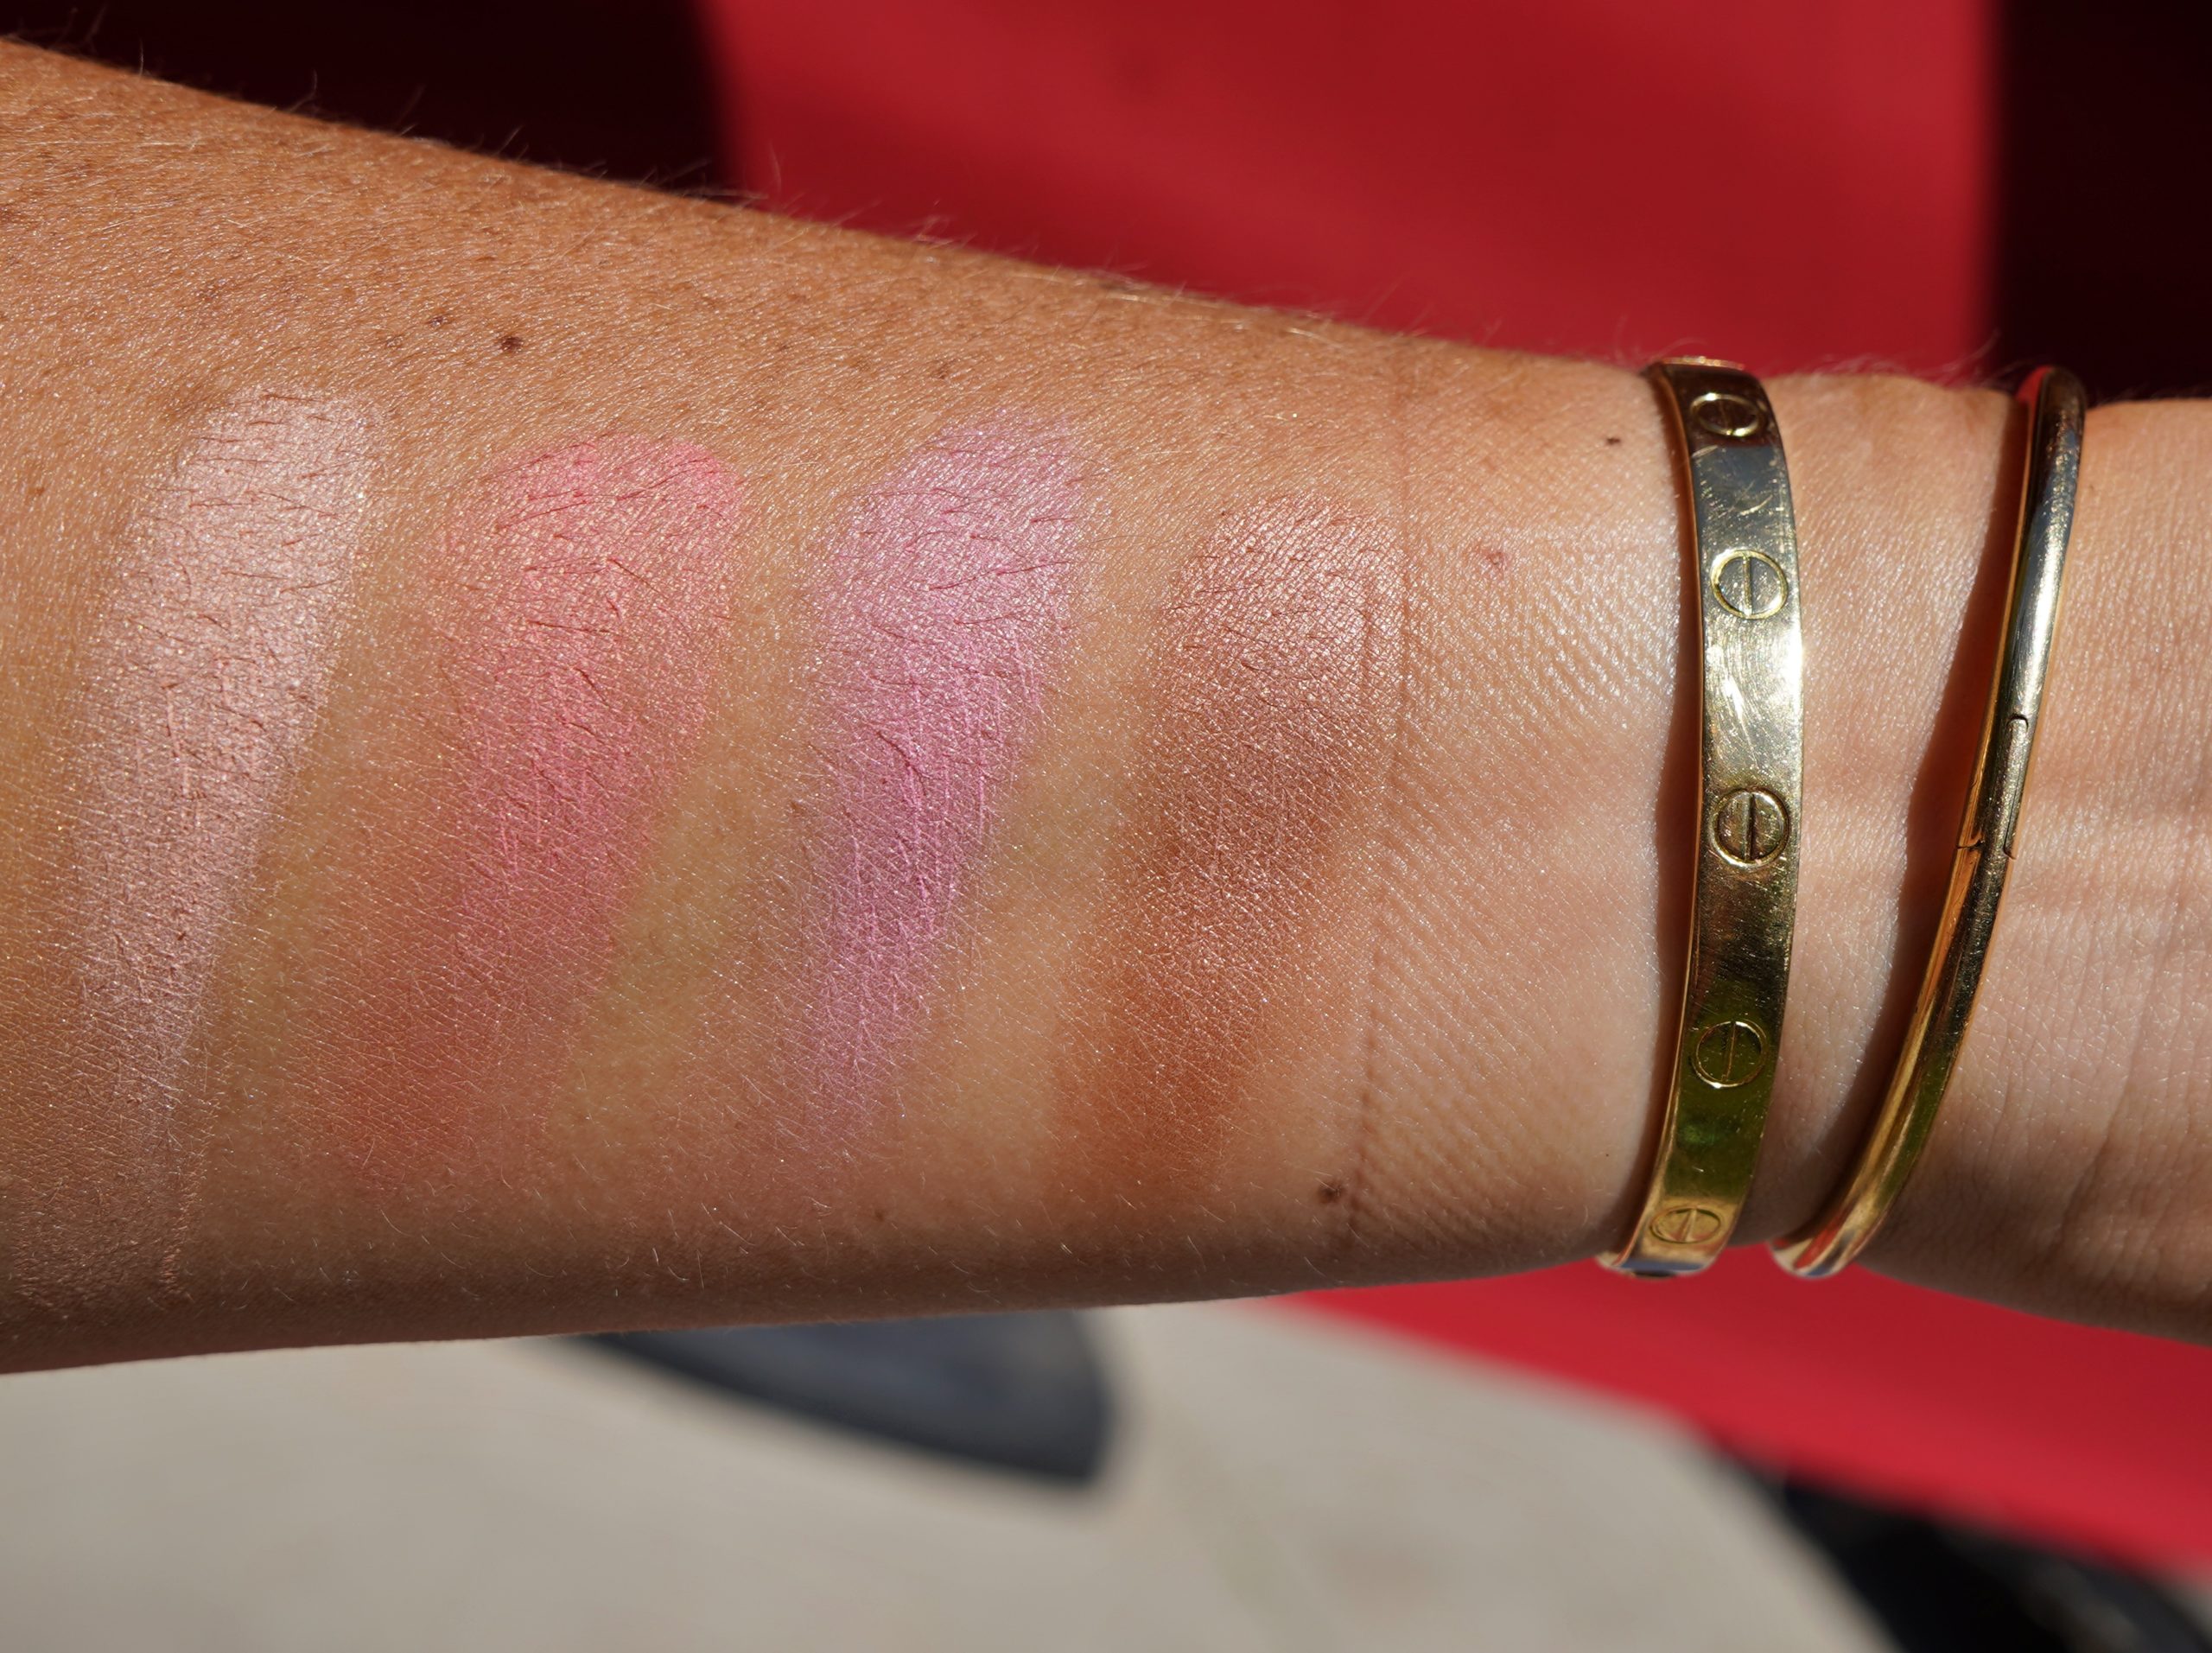 watches of the BY TERRY Brightening CC Palette in Beach Bomb 